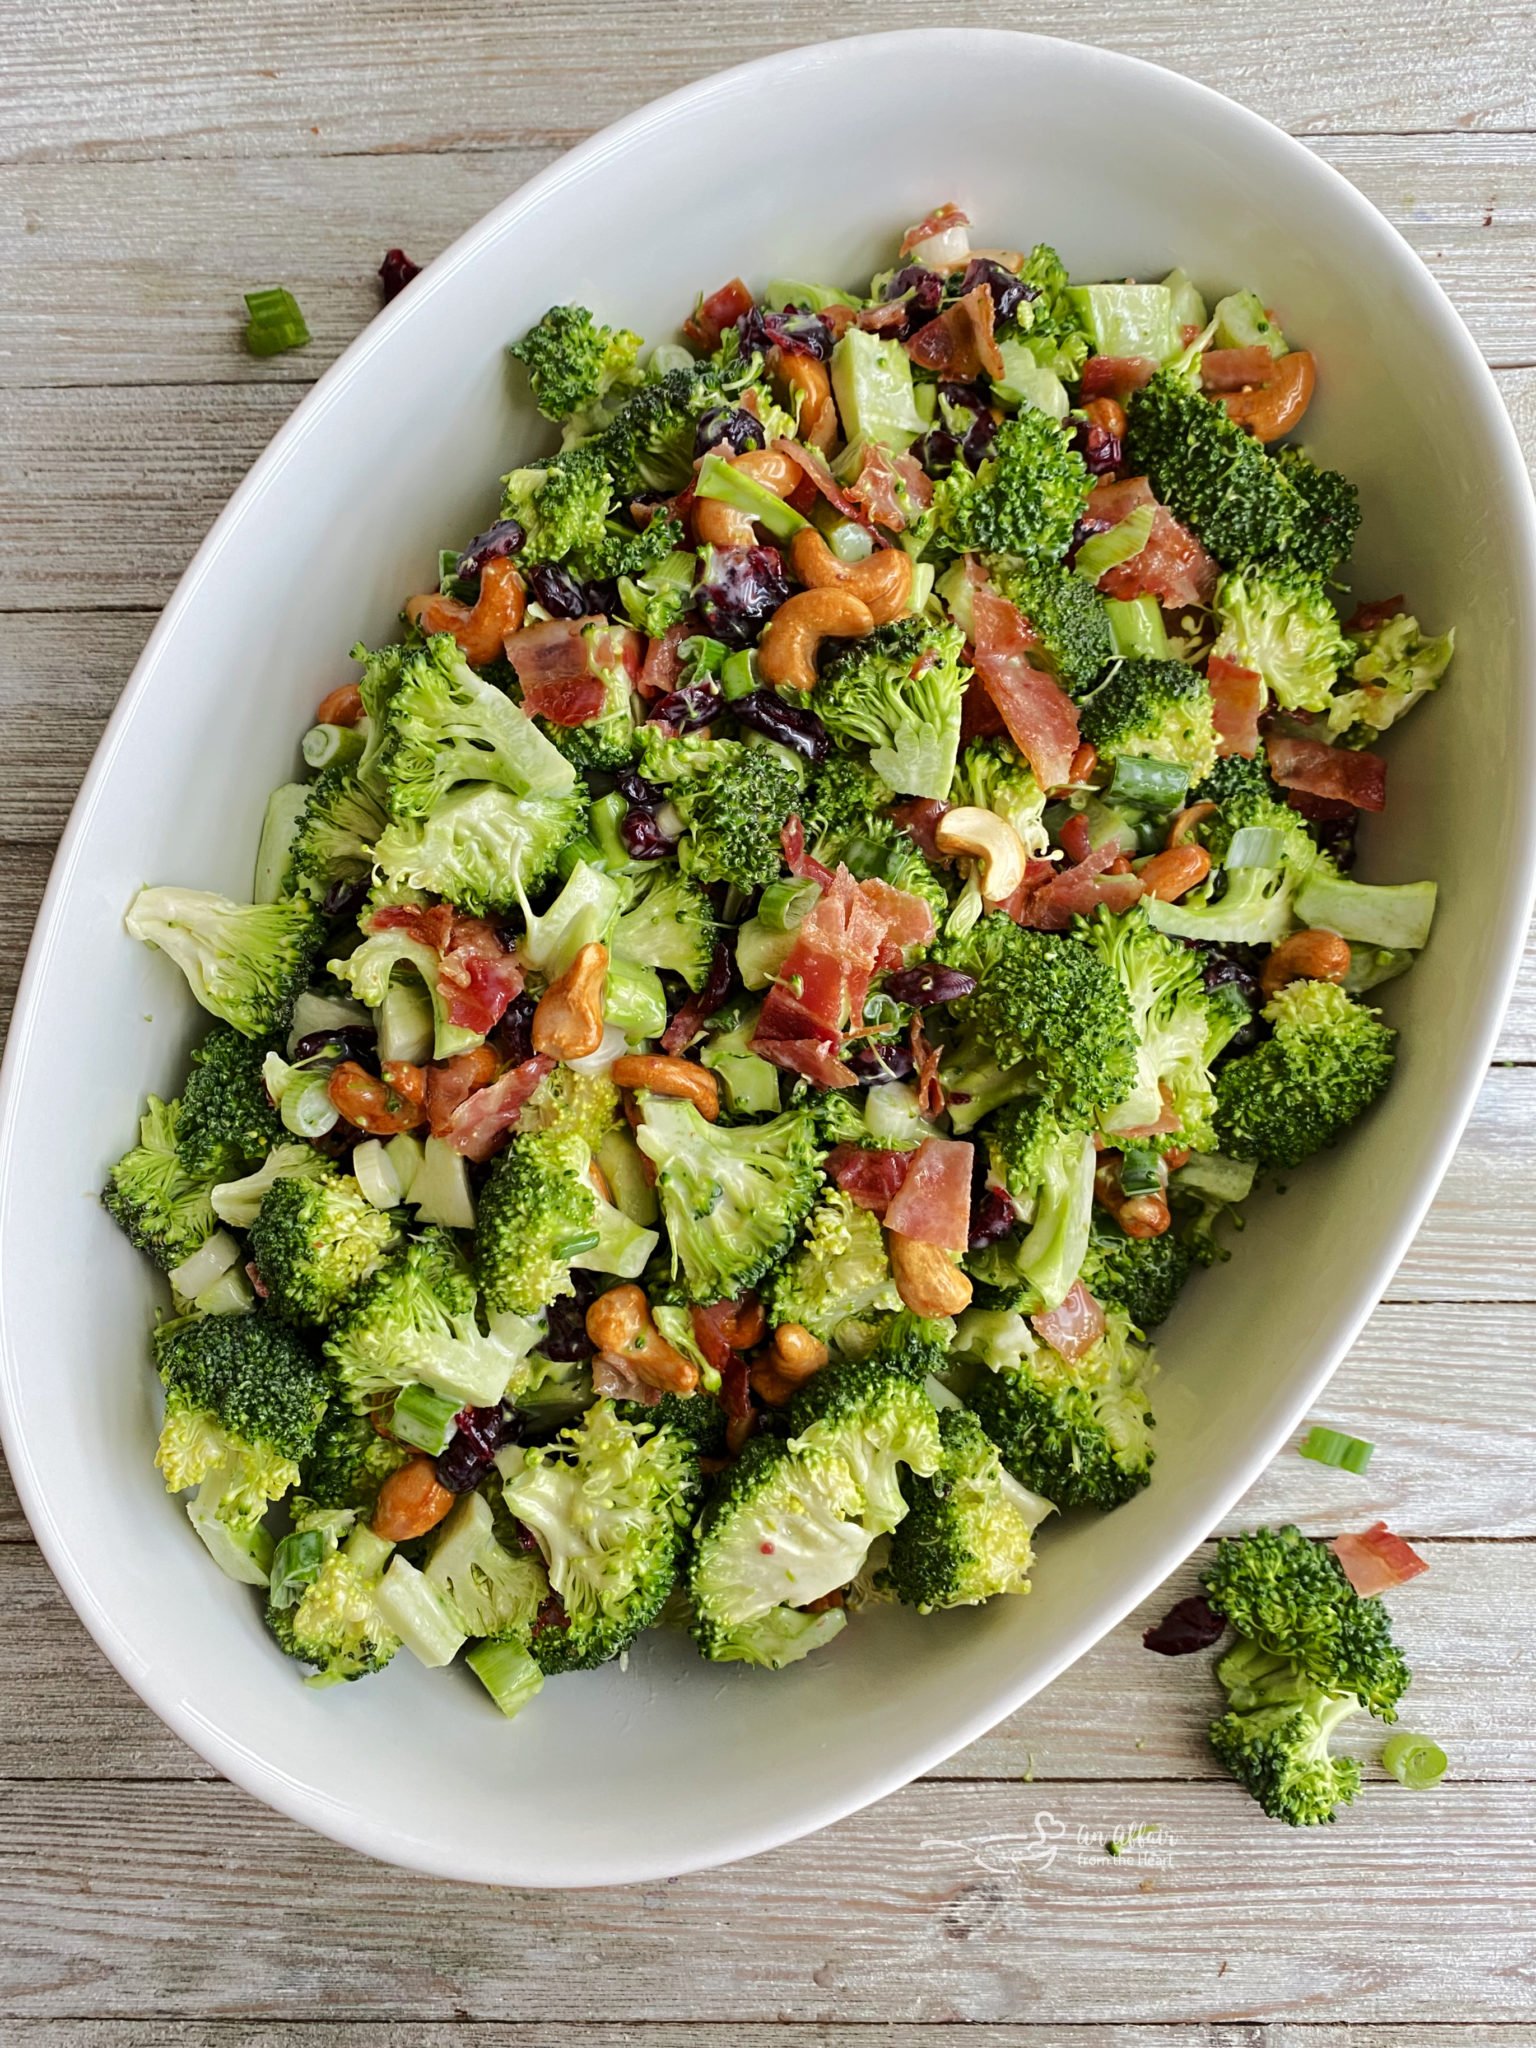 Bacon Cashew Broccoli Salad - Tossed in a Sweet Dressing. YUMMY!